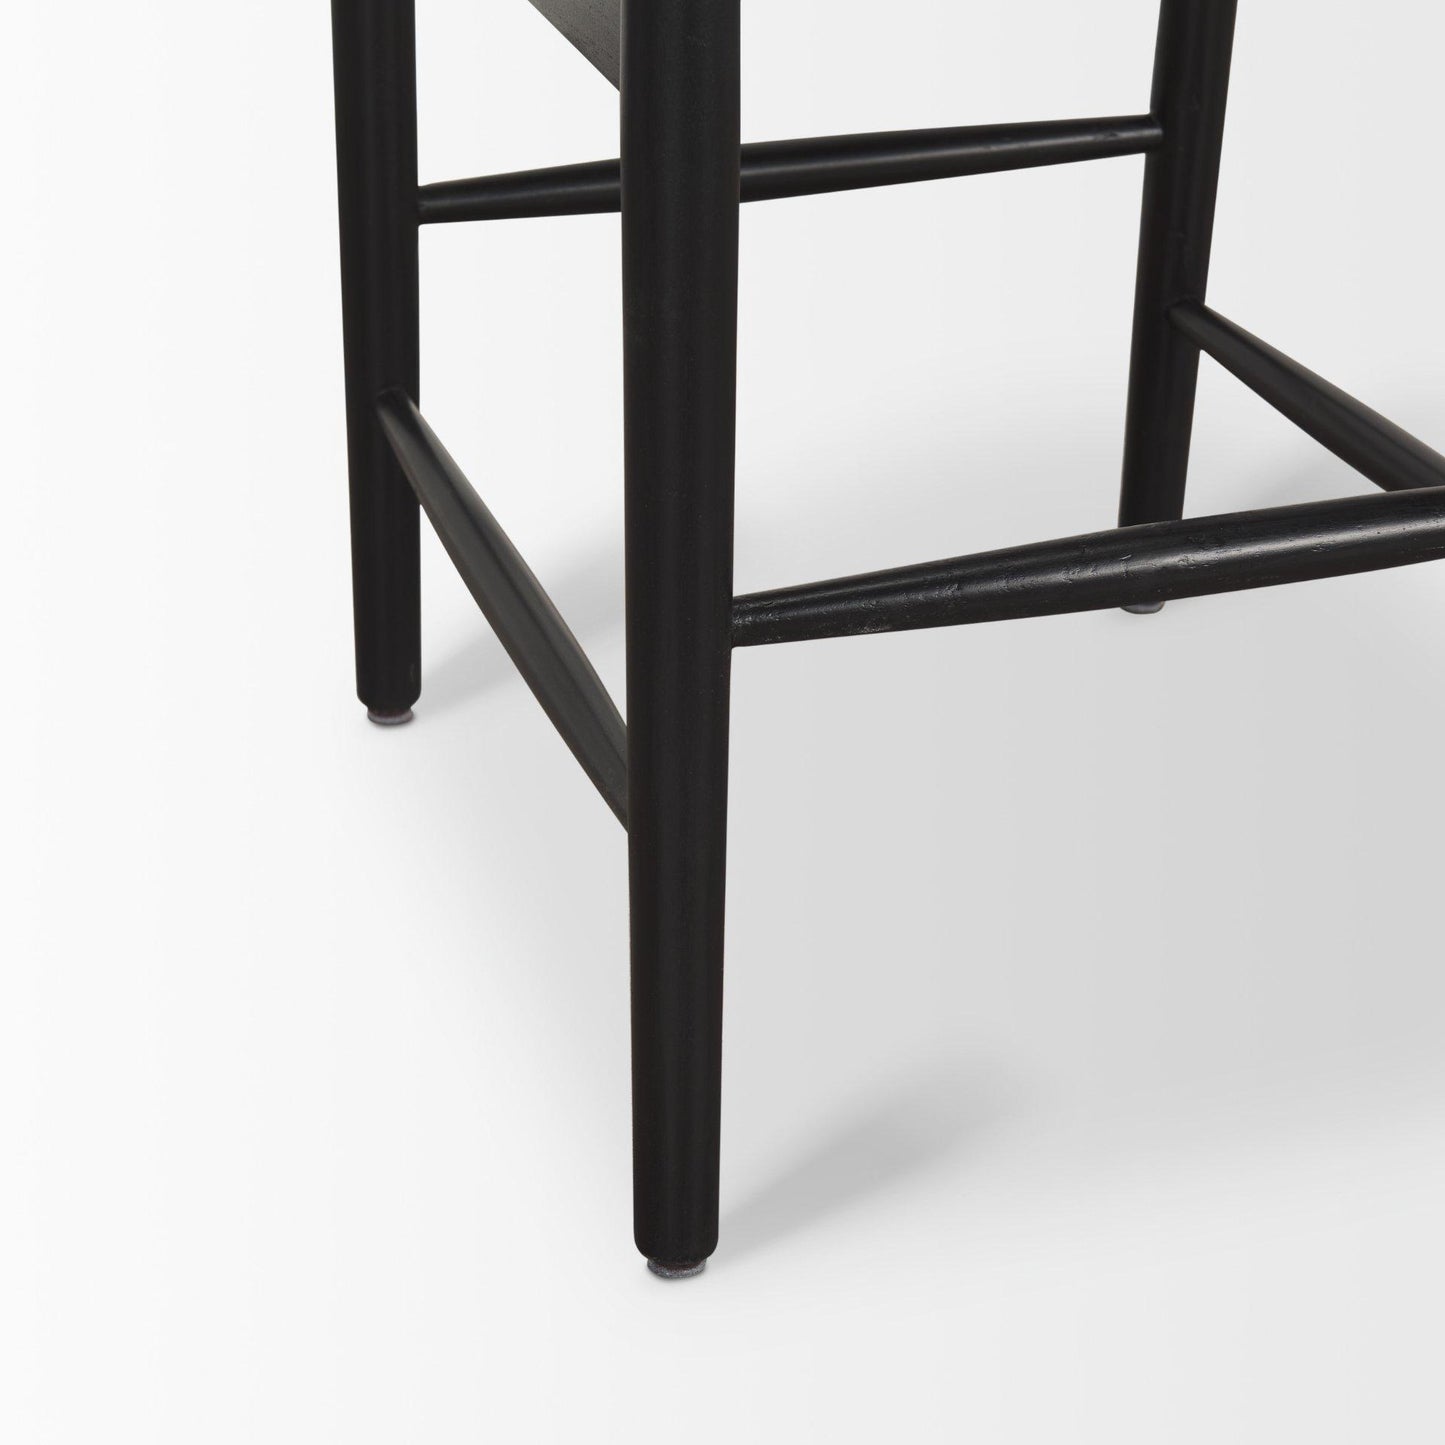 Trixie Black Wood Frame w/ Gray Upholstered Seat Bar Stool